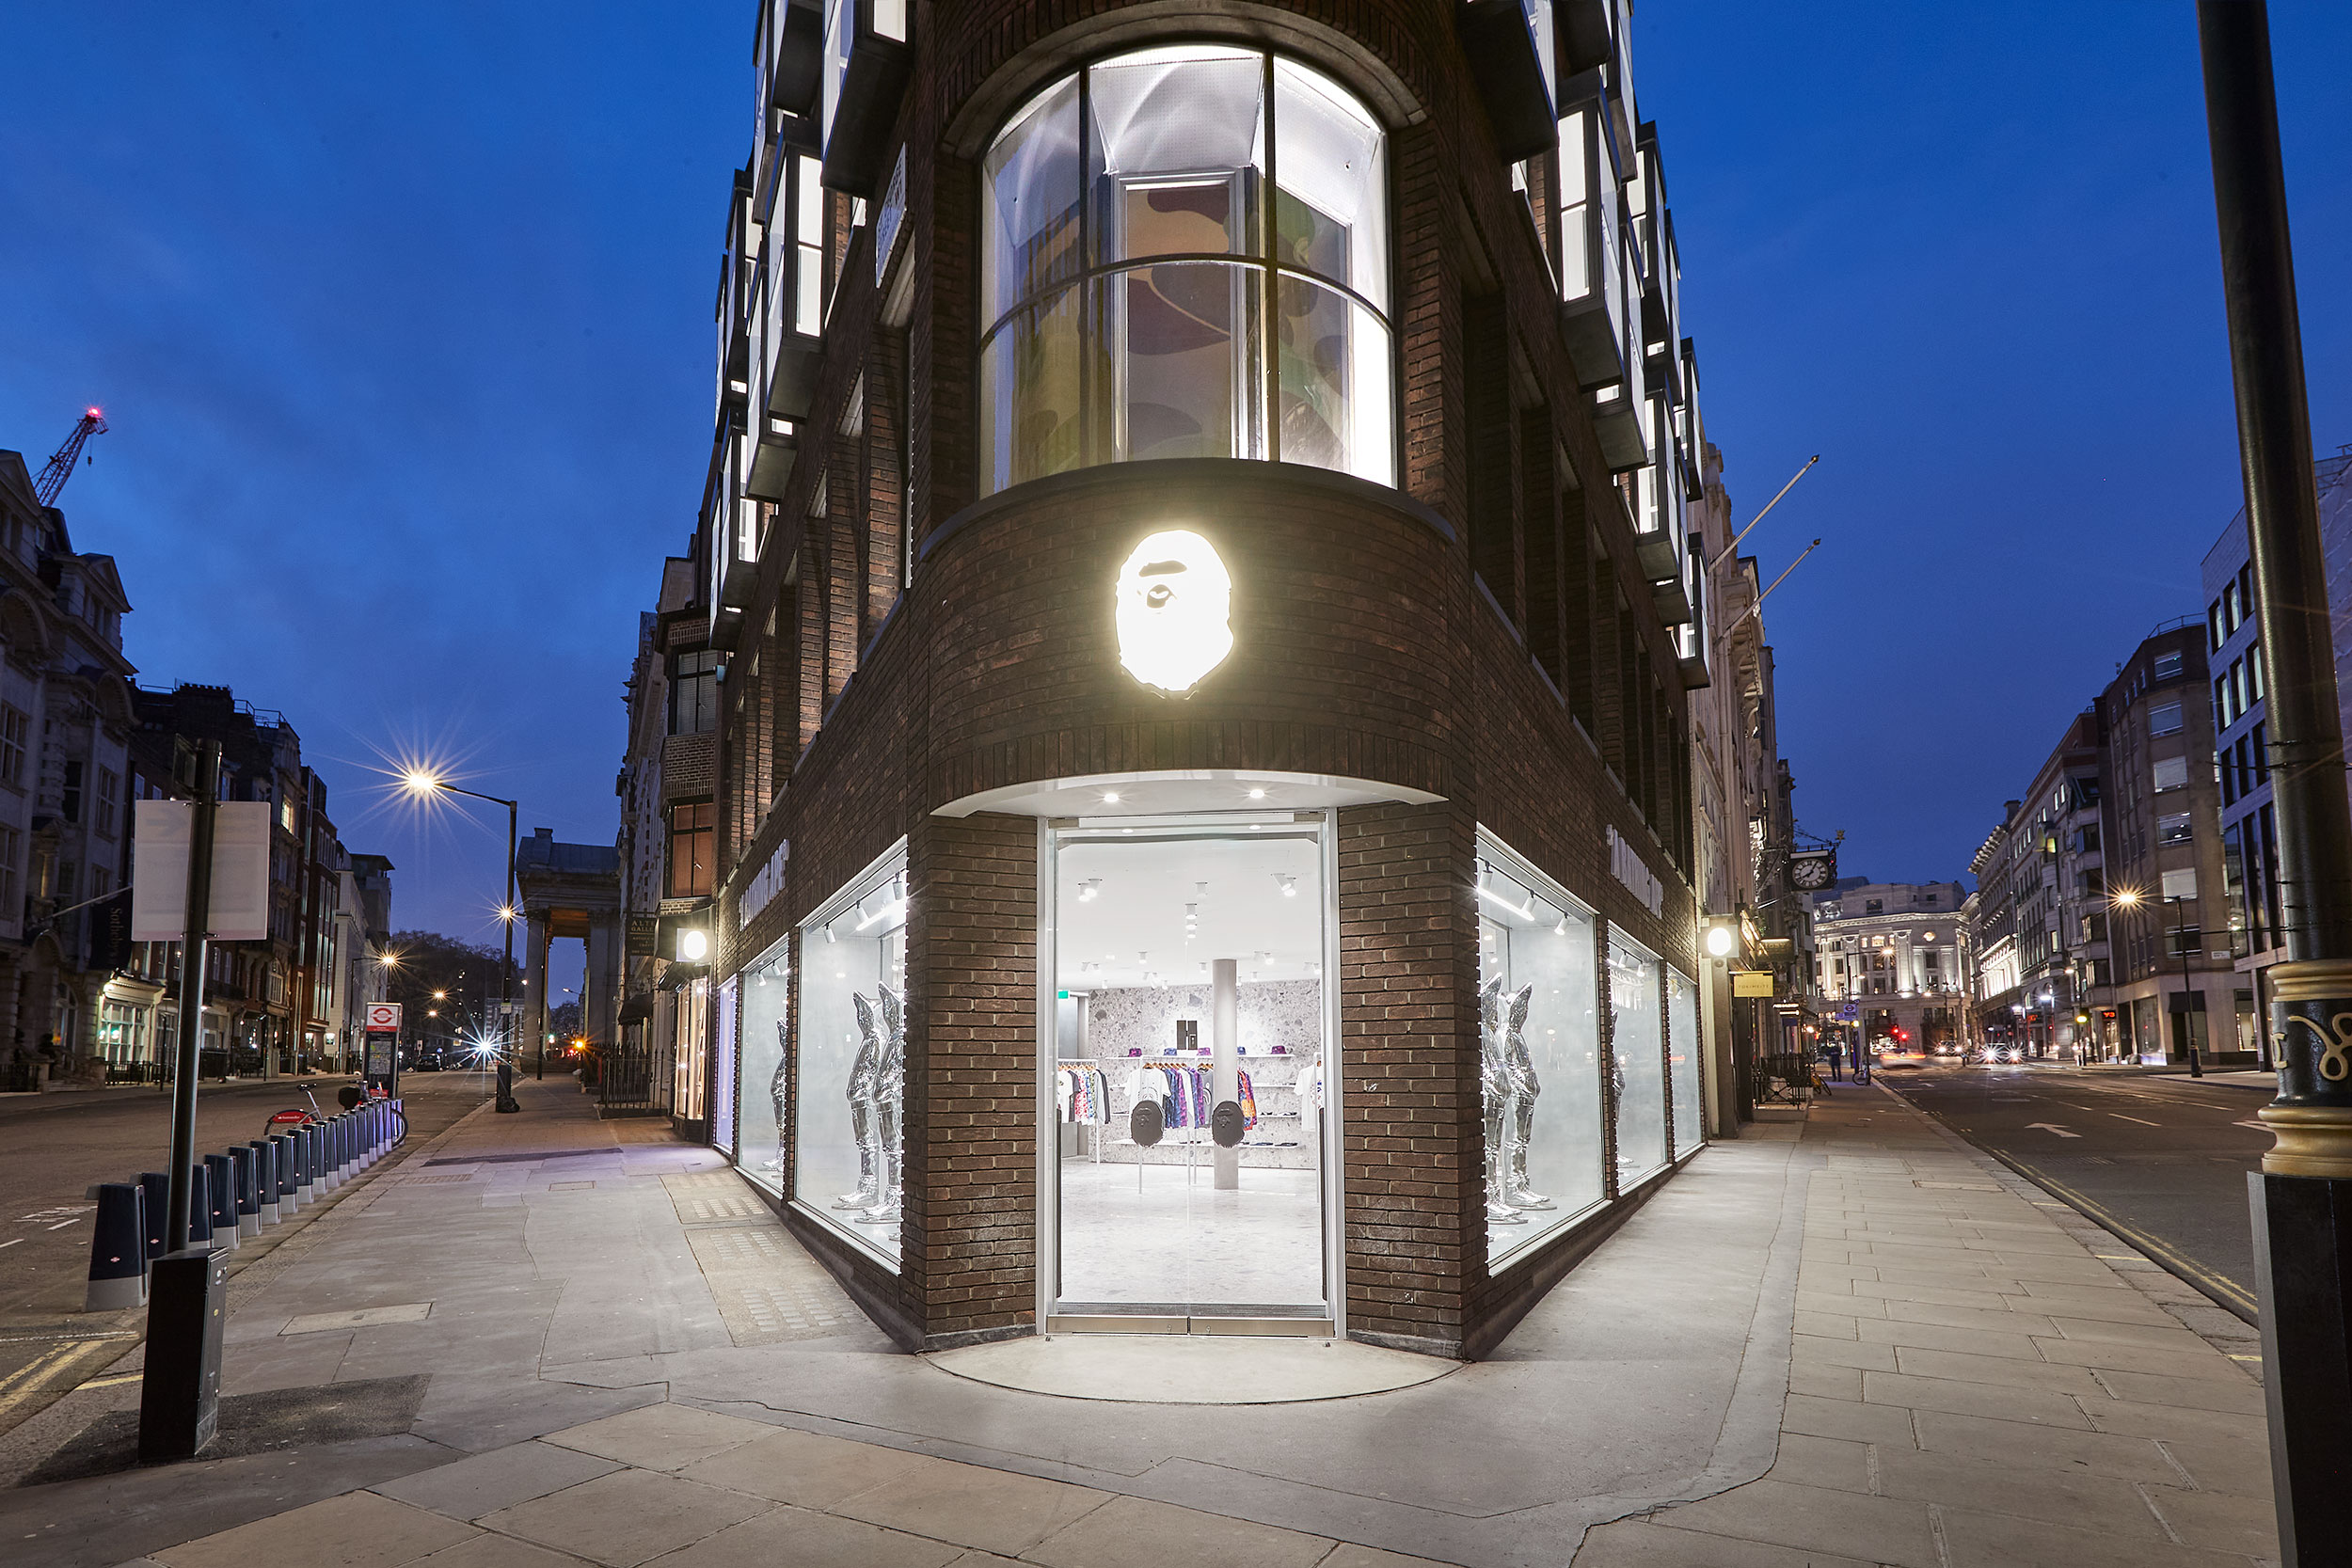 BAPE opens its Biggest Ever Store in Central London